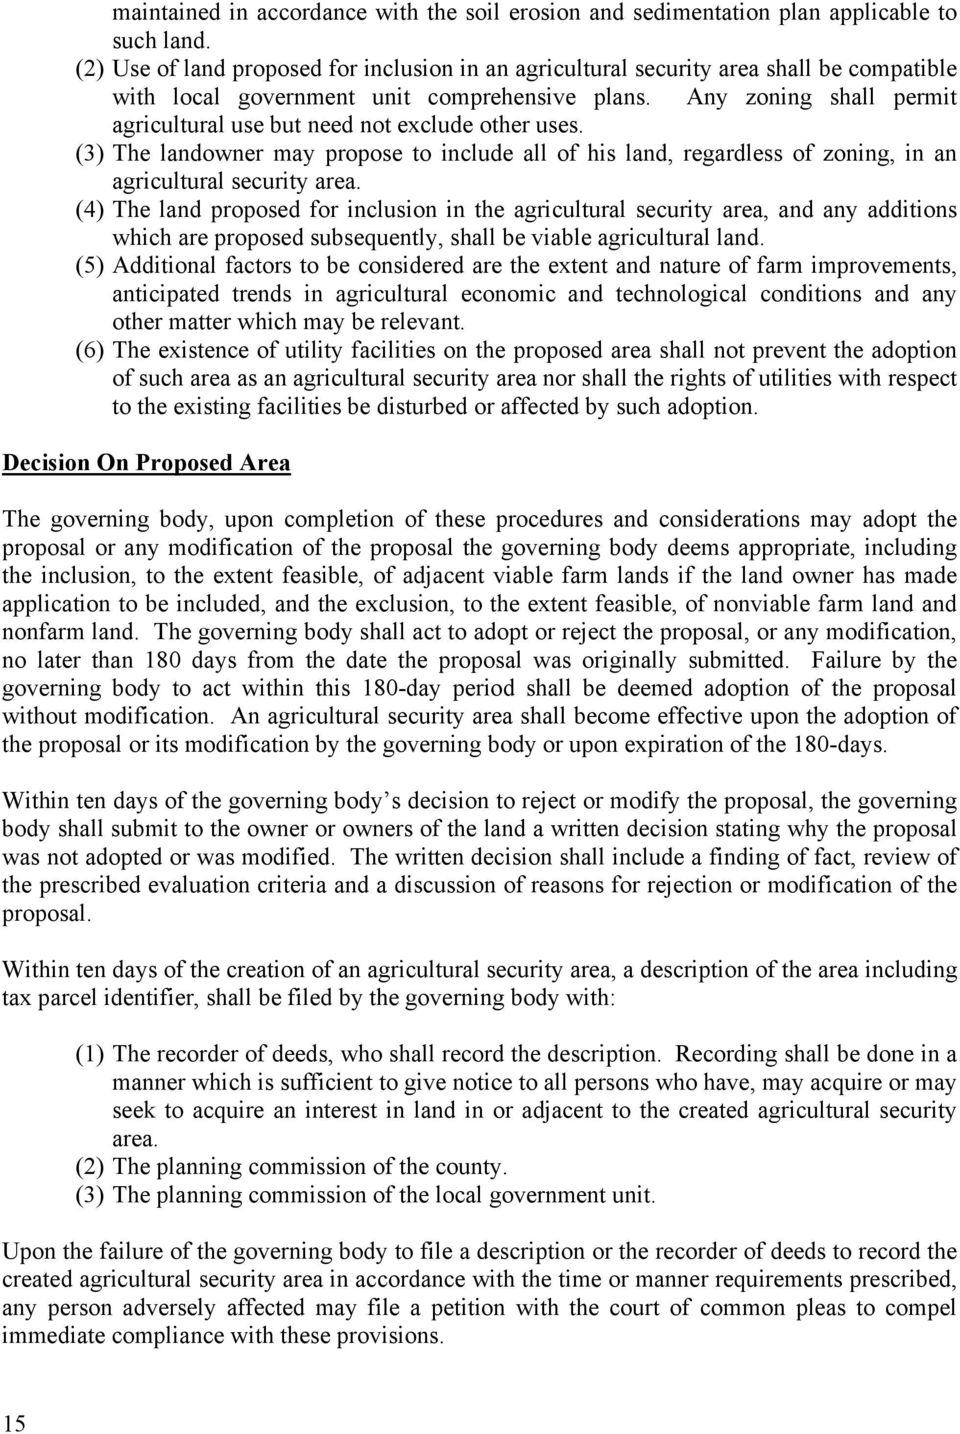 Any zoning shall permit agricultural use but need not exclude other uses. (3) The landowner may propose to include all of his land, regardless of zoning, in an agricultural security area.